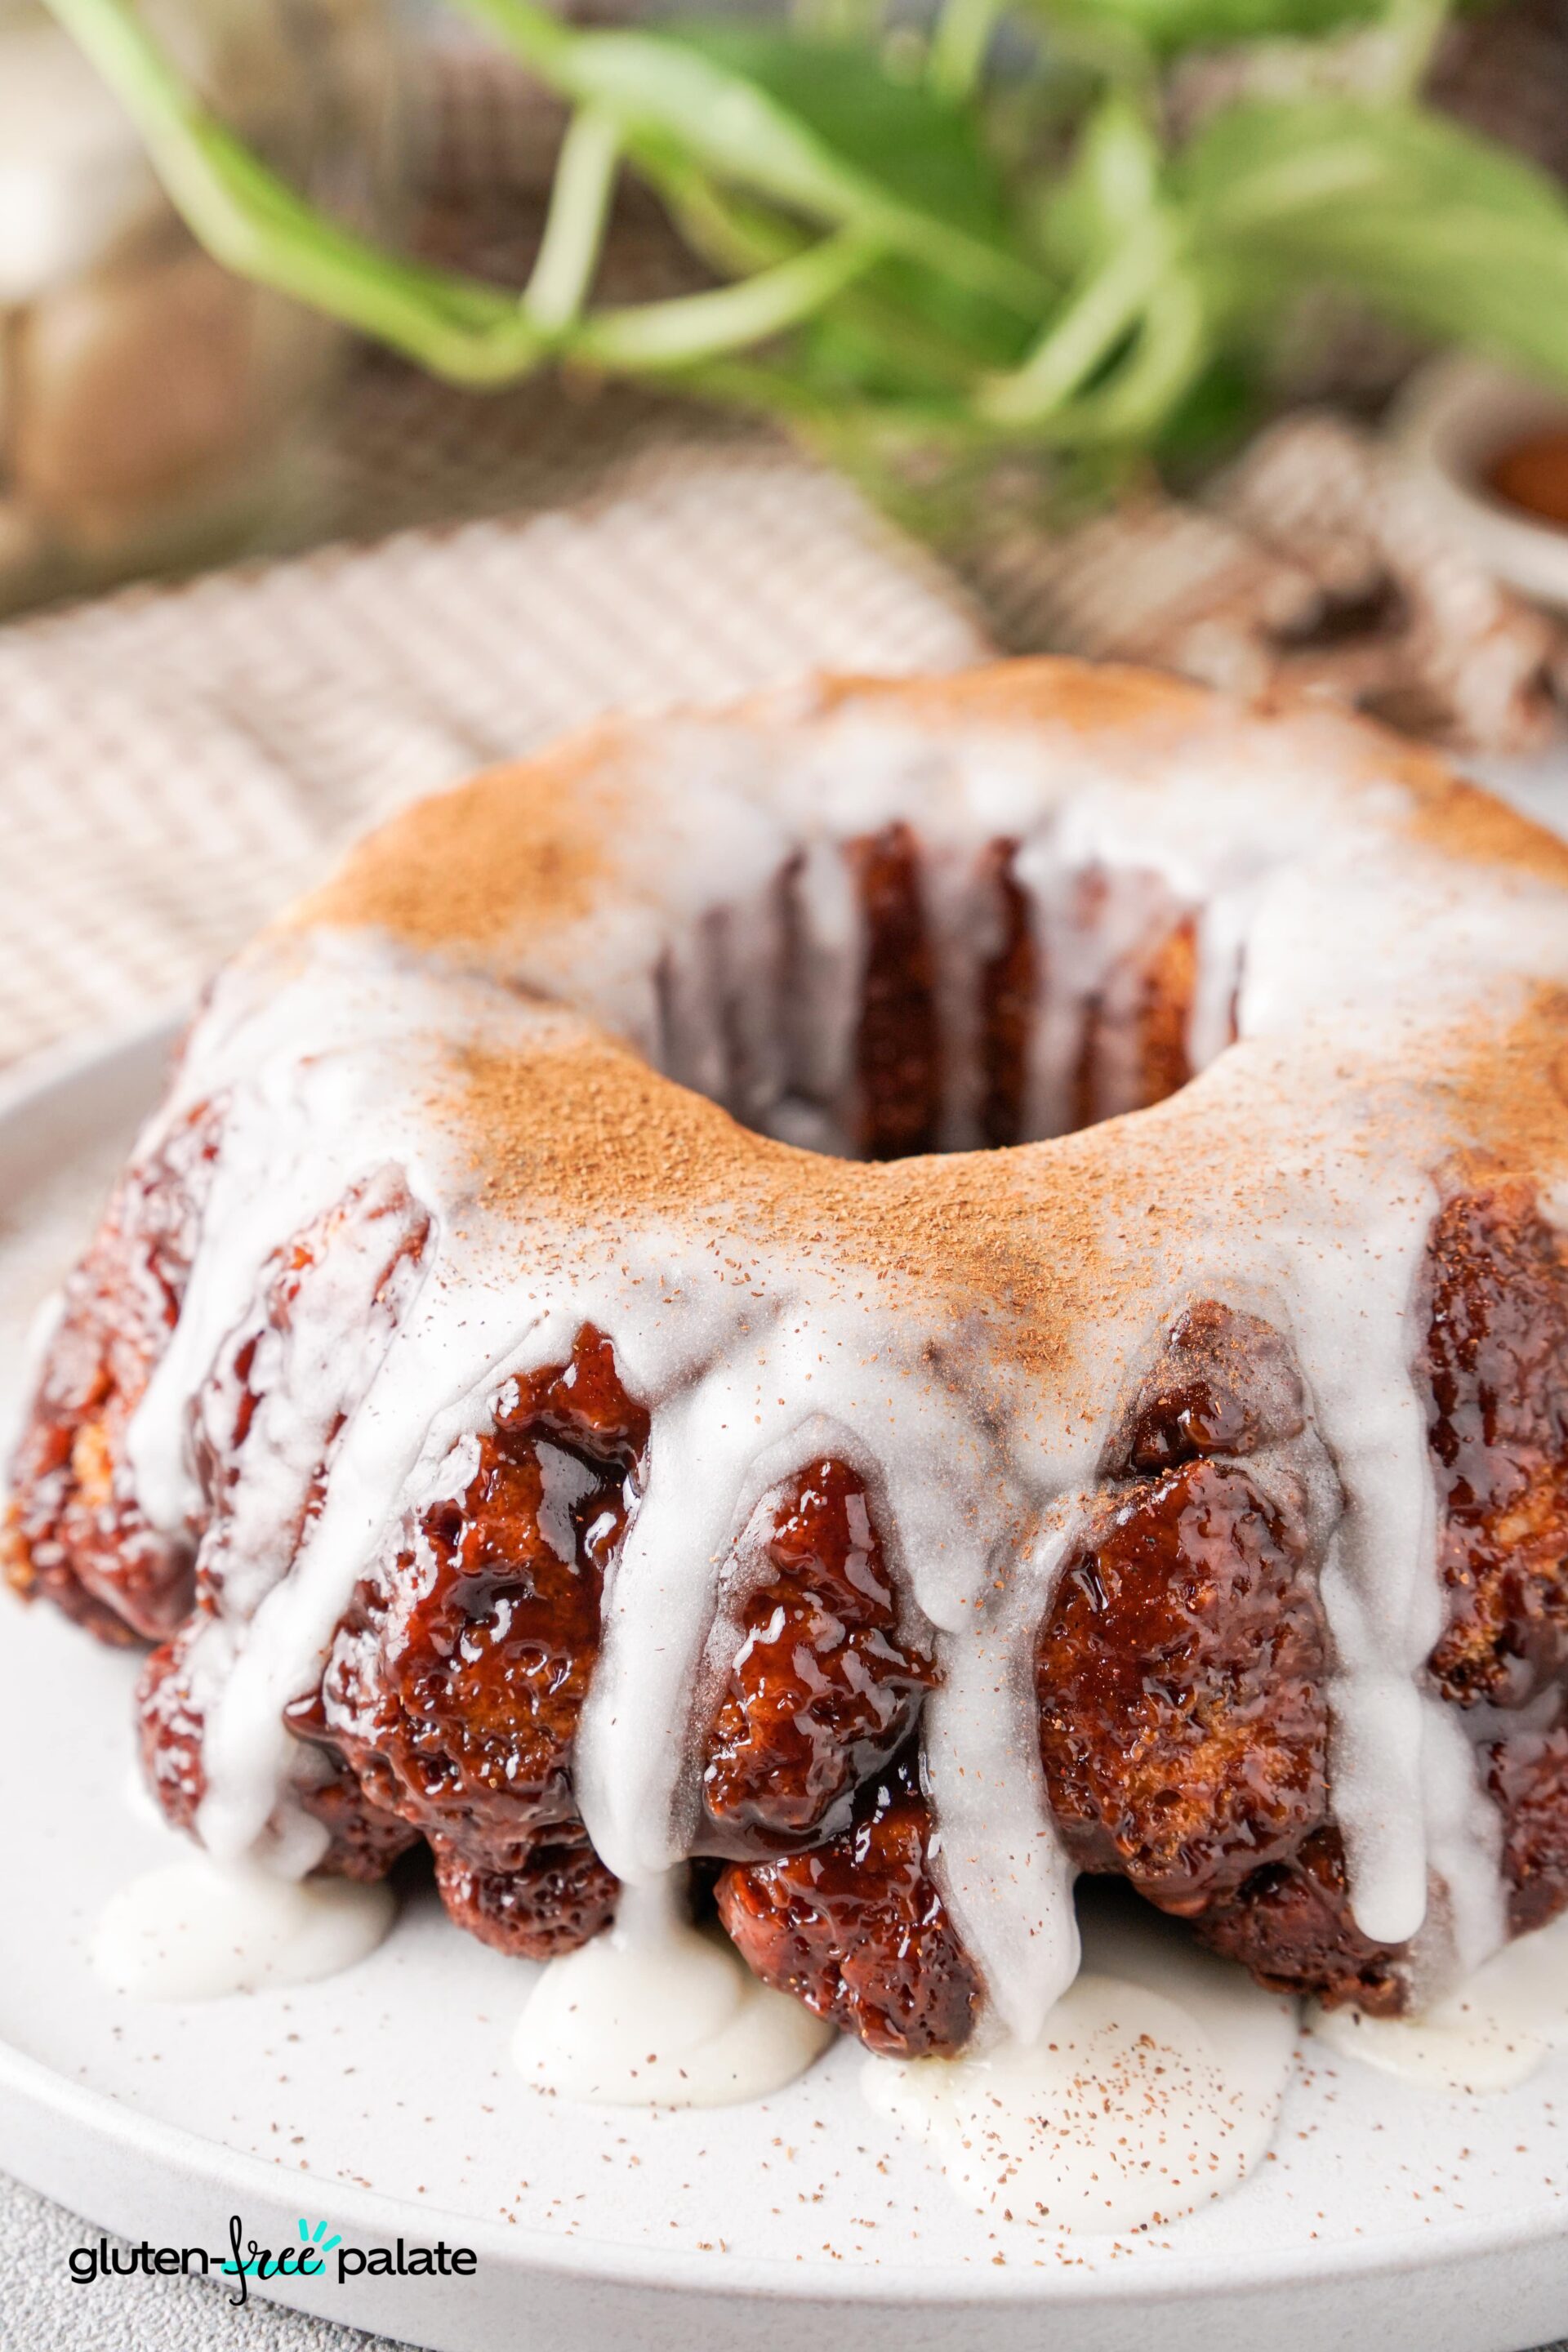 Pull Apart Monkey Bread (From Scratch) - Rich And Delish